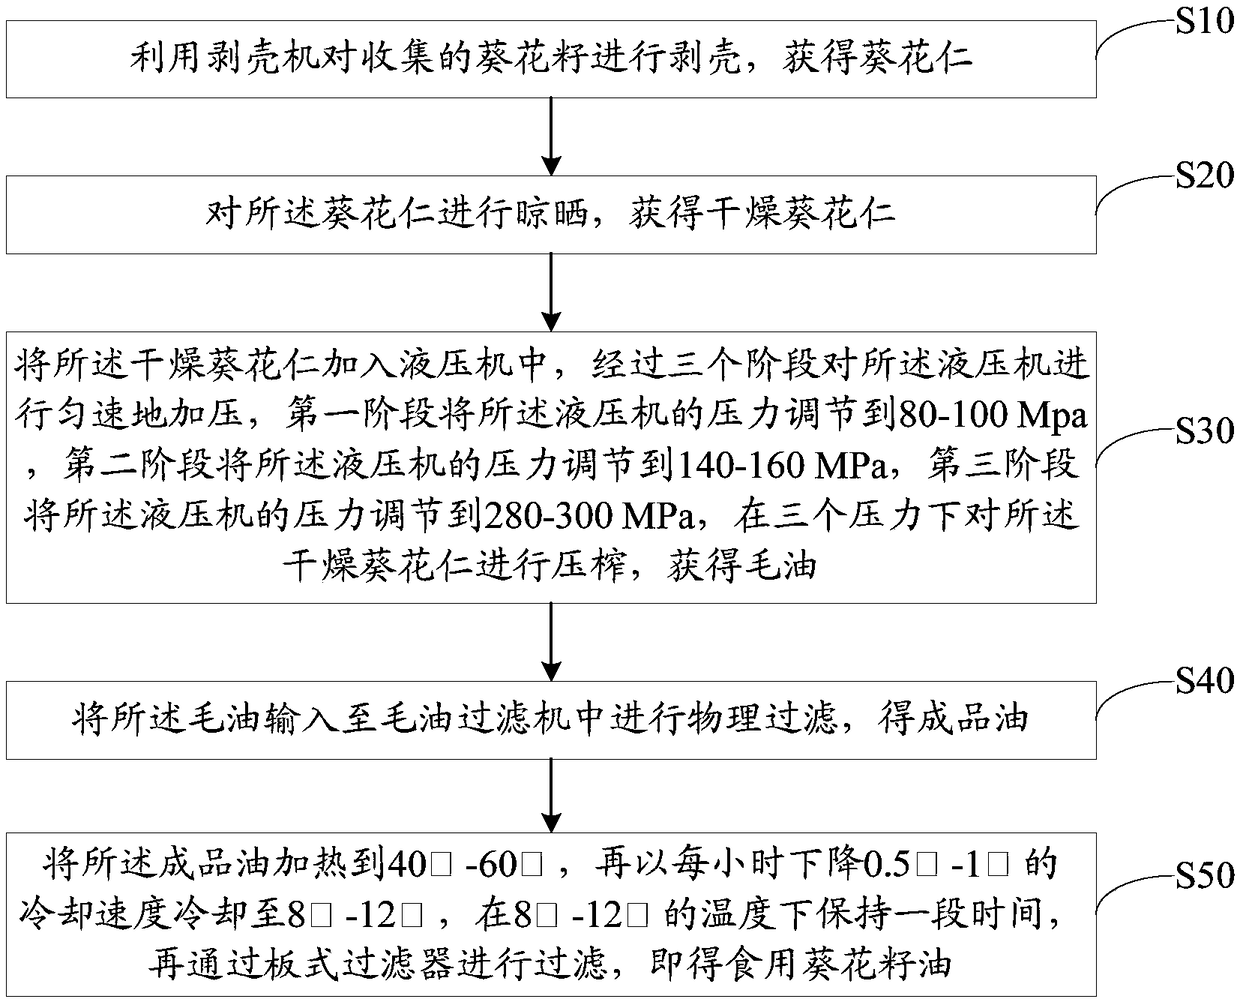 Production method of sunflower seed oil and edible sunflower seed oil